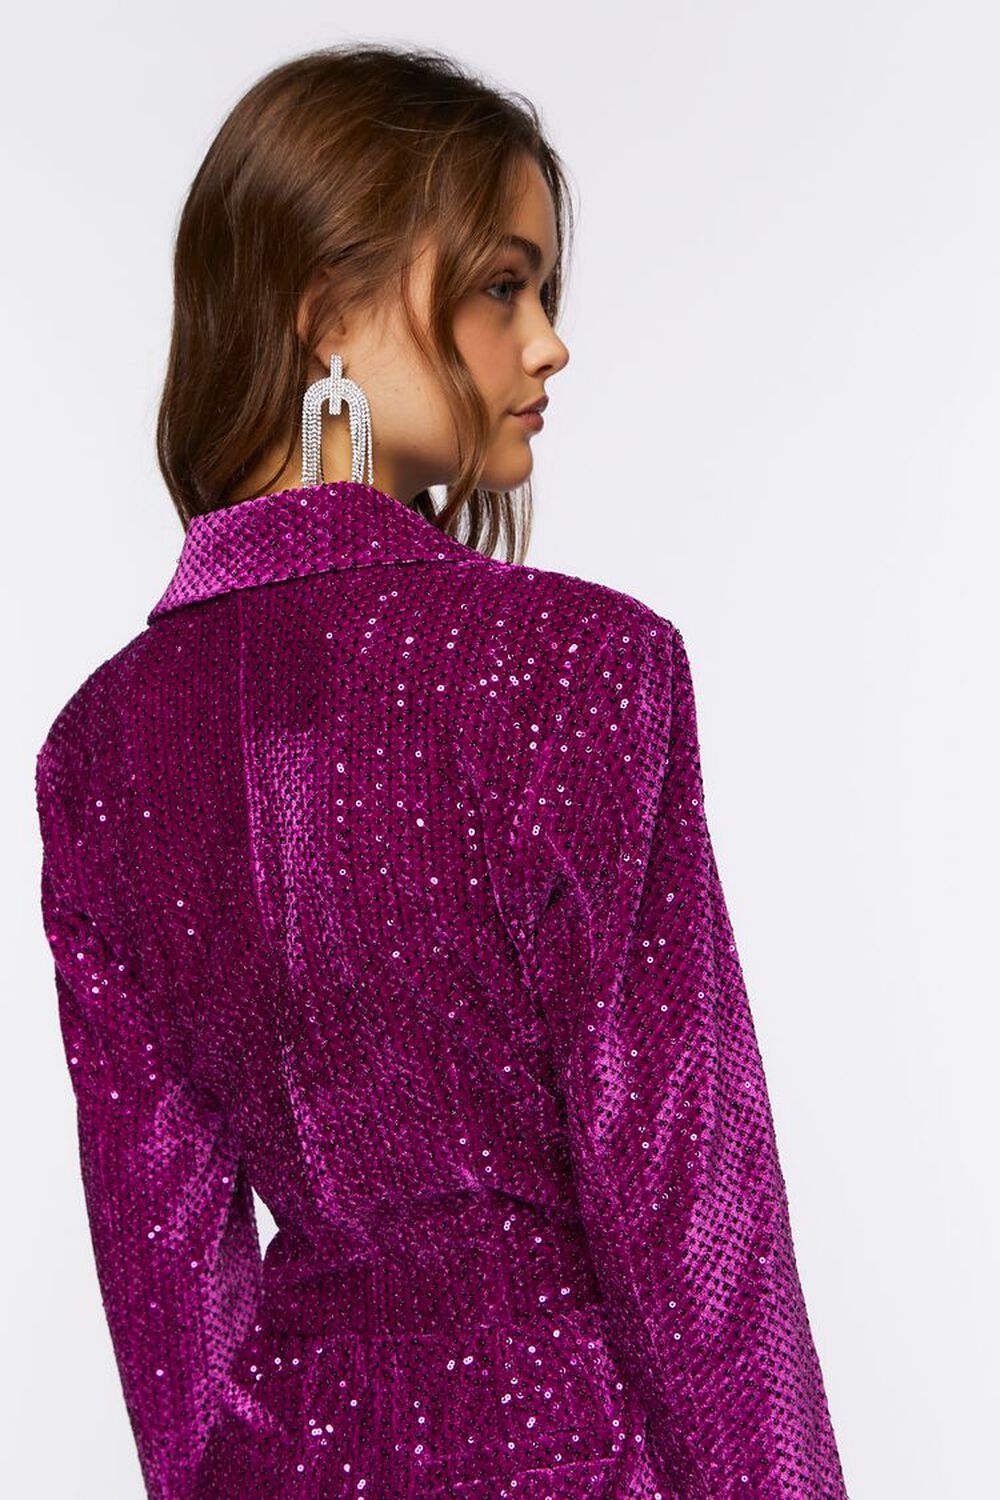 Sequin Solid Lapel Cropped Blazer